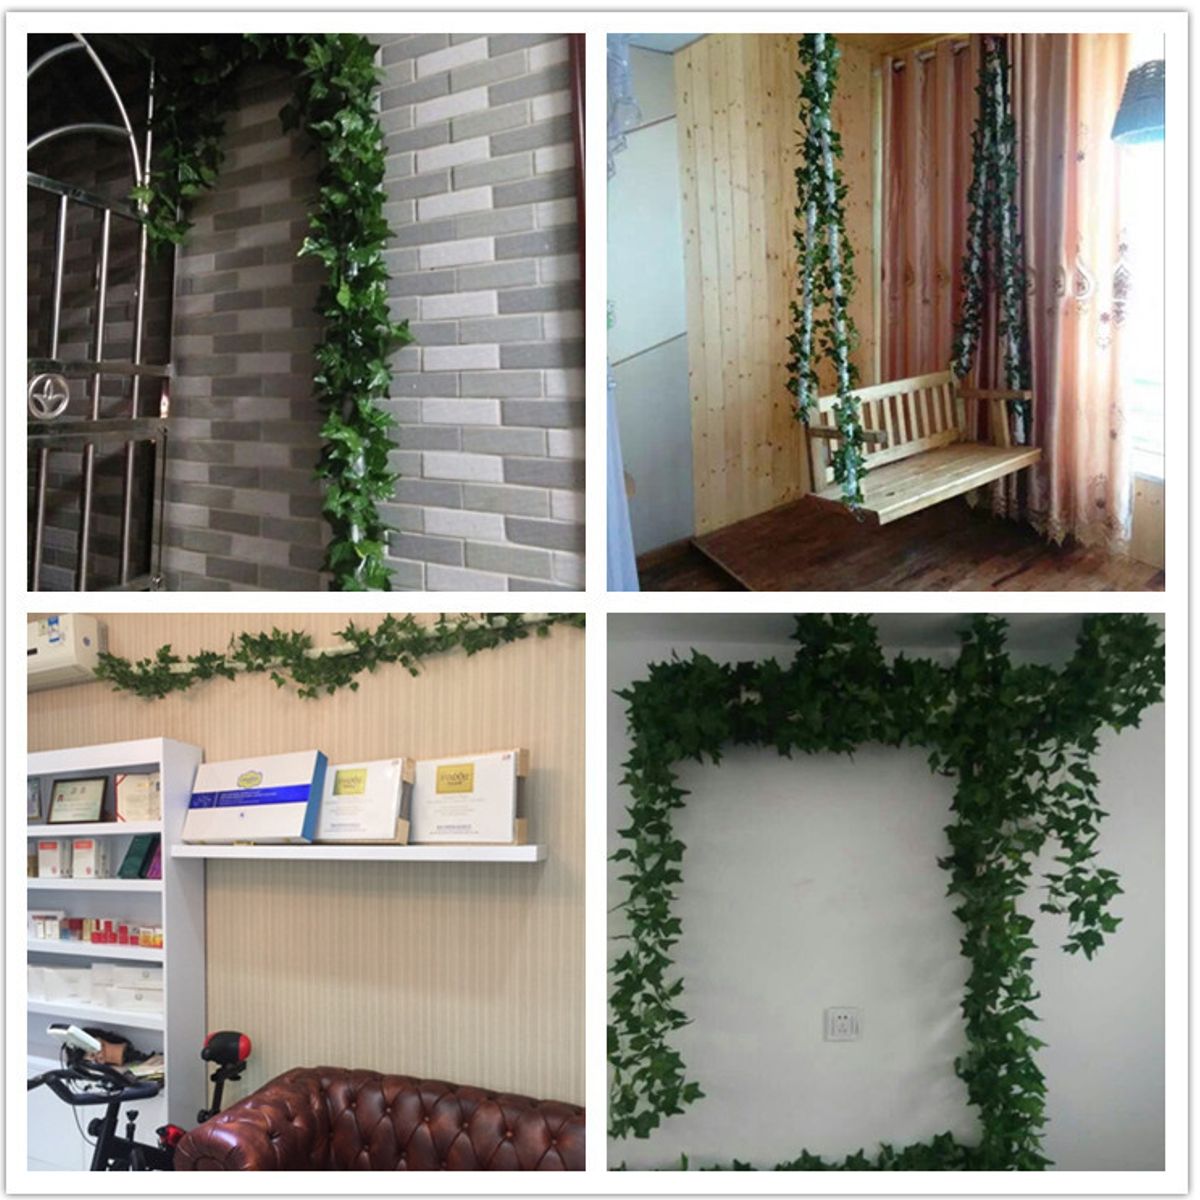 Artificial-Vines-Grape-Leaves-Green-Leafy-Plants-Ceiling-Decoration-Pipes-To-Block-Vine-Creepers-1730979